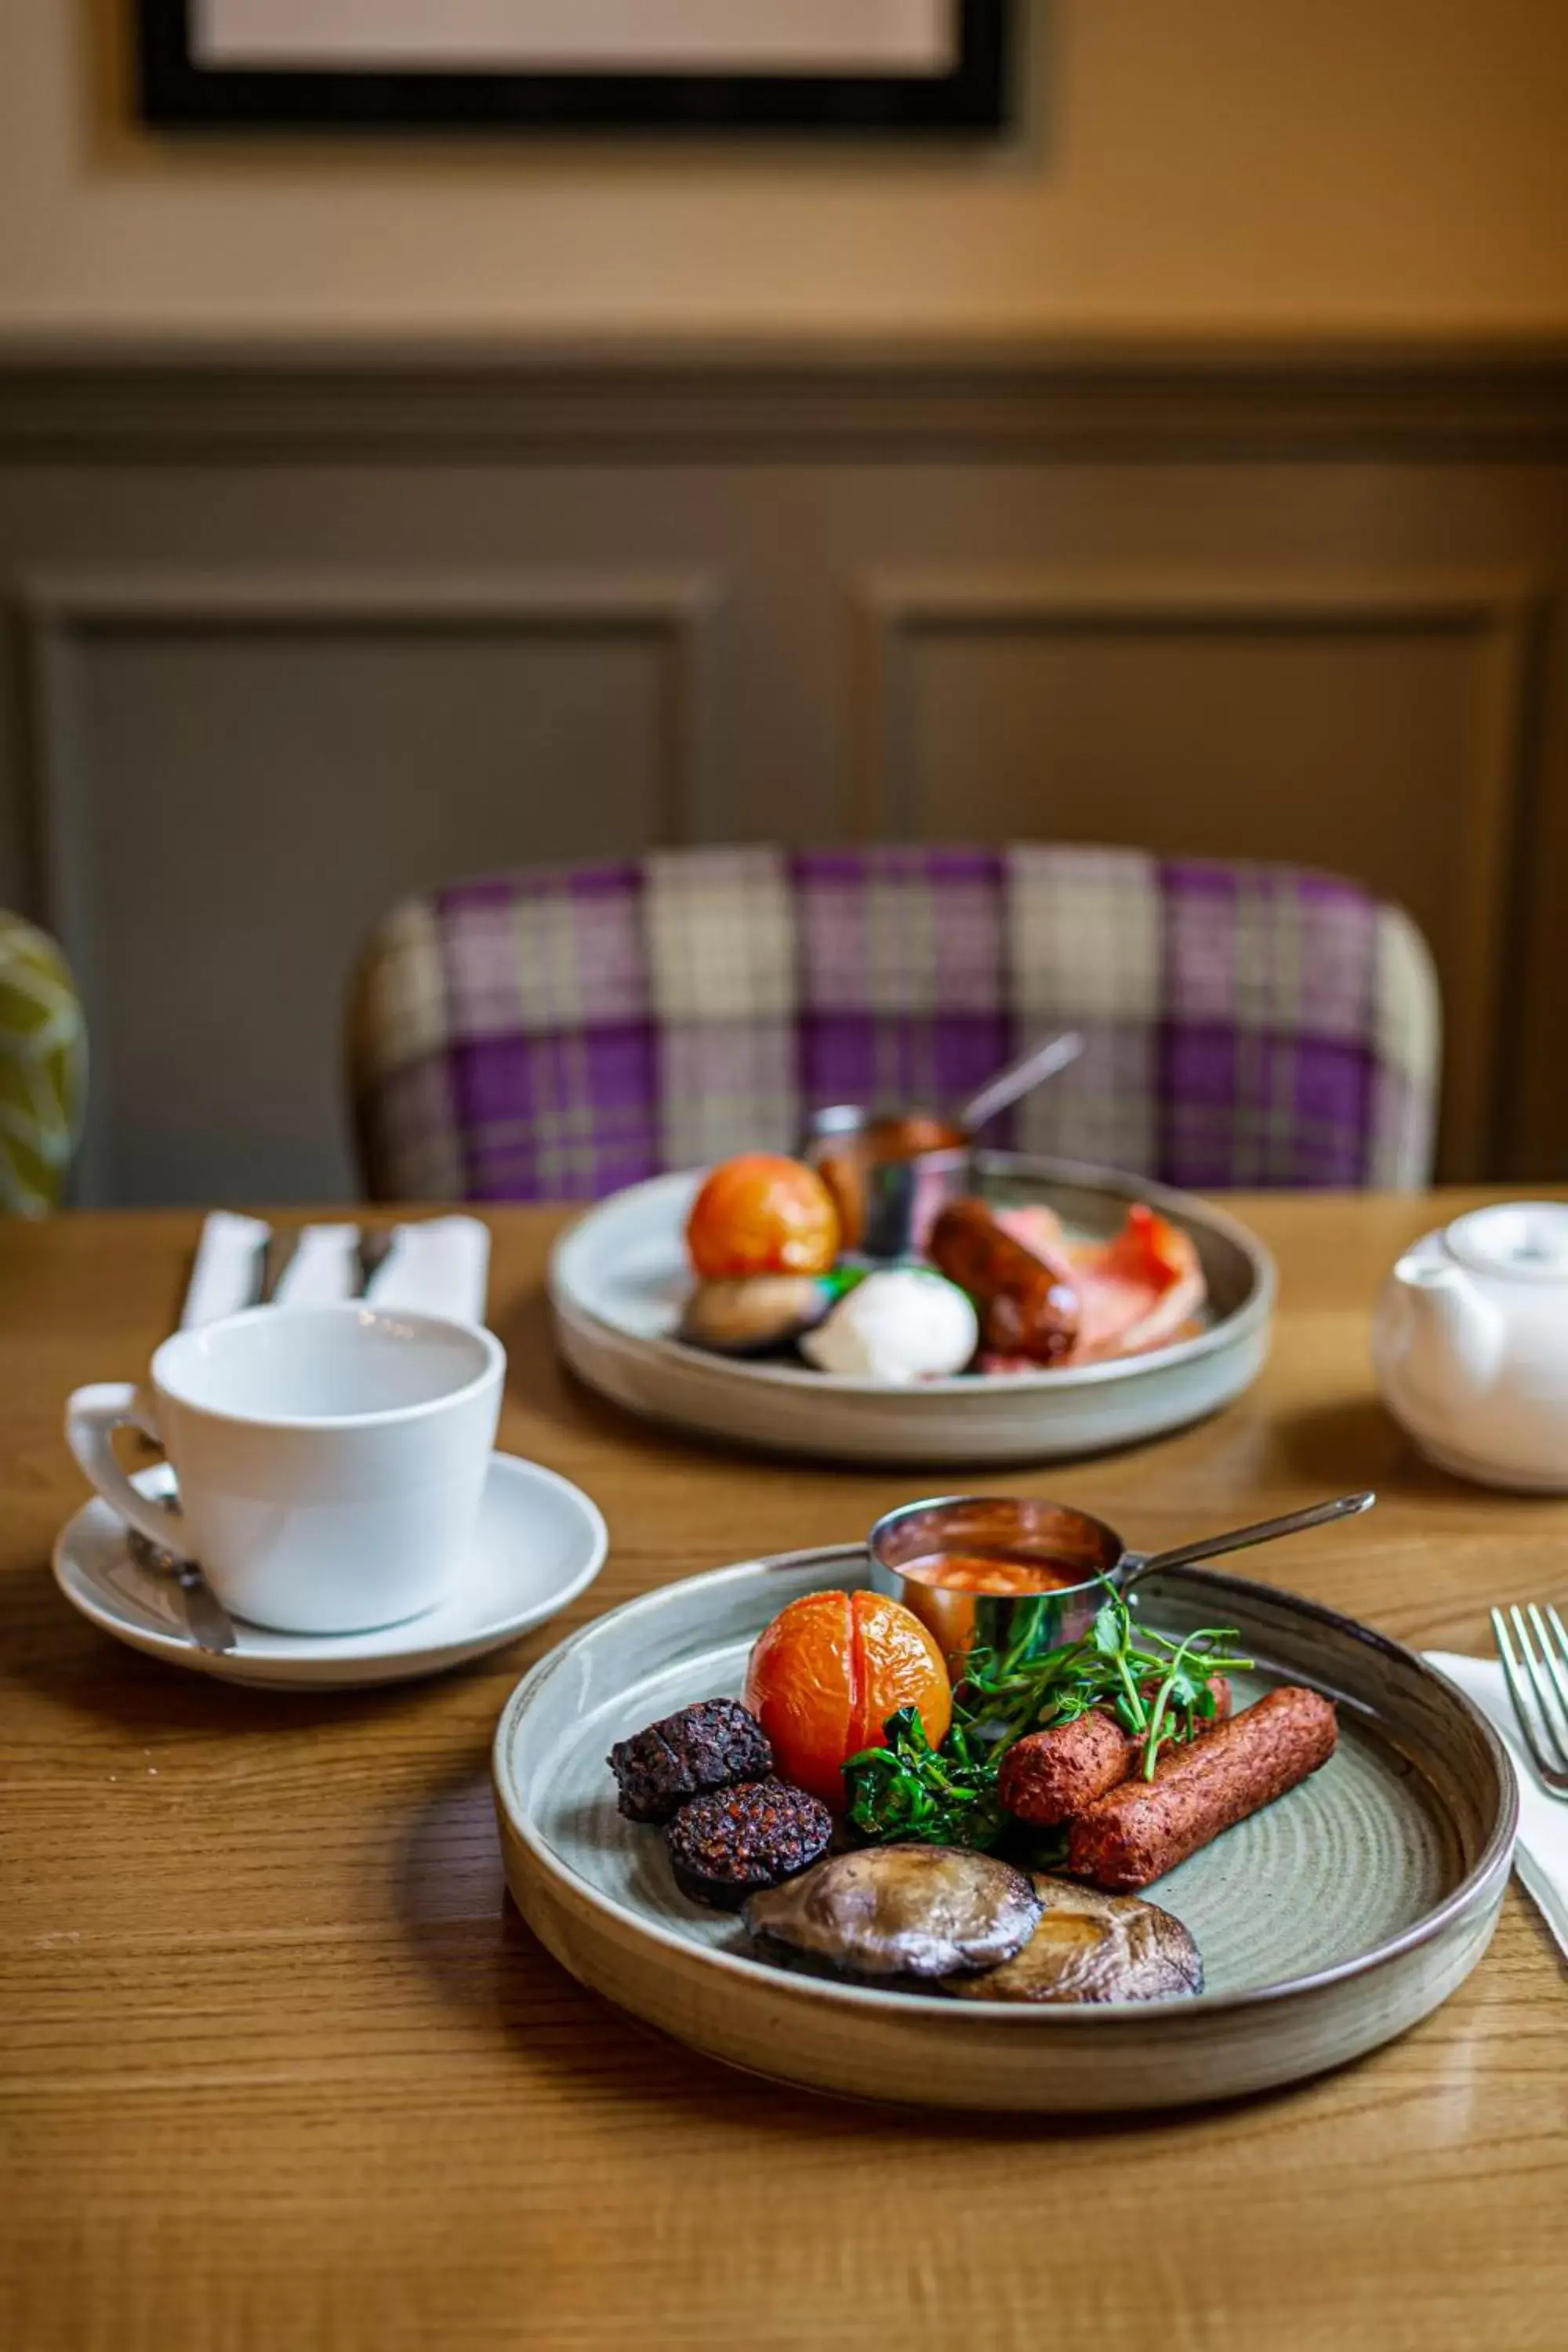 Breakfast in The Rutland Arms Hotel, Bakewell, Derbyshire